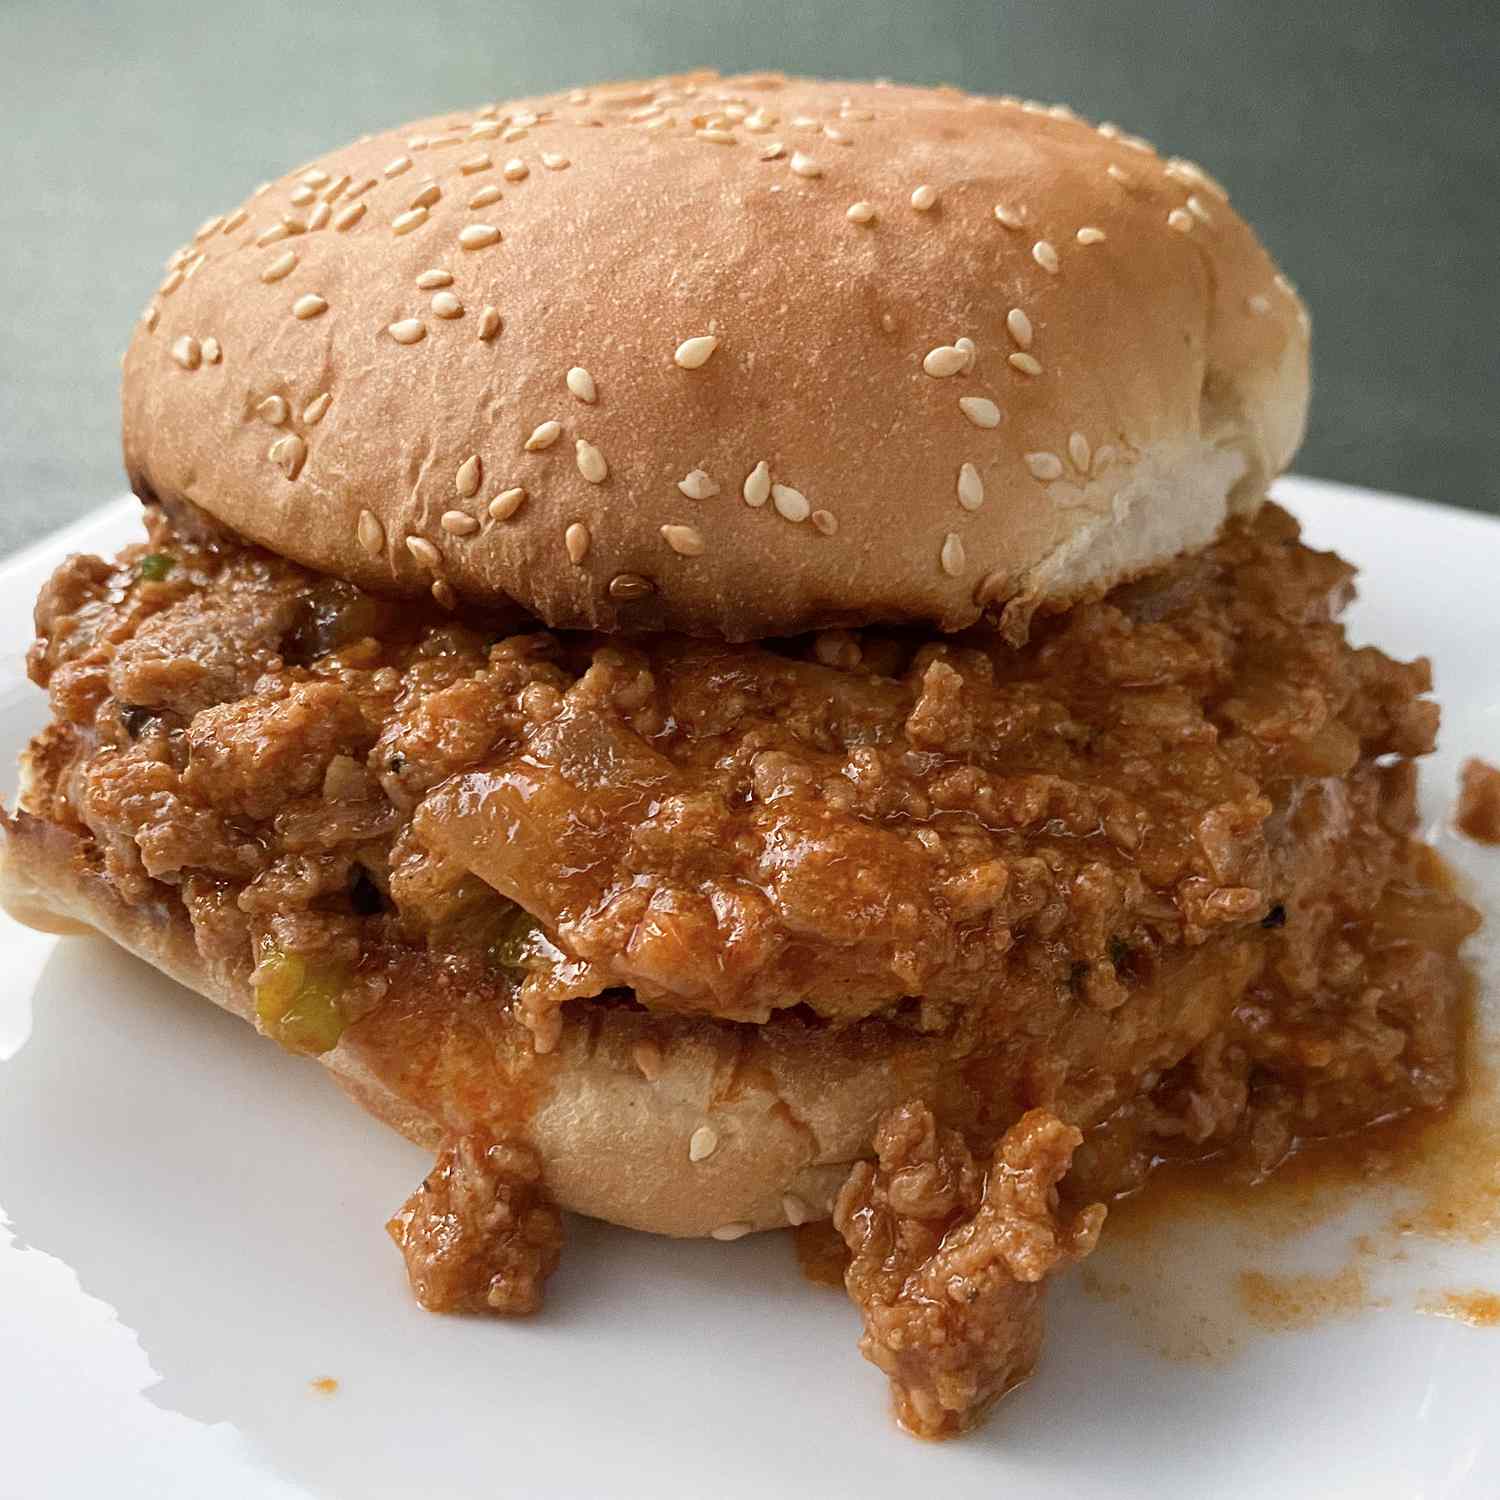 Close up view of a Turkey Sloppy Joes sandwich on a white plate